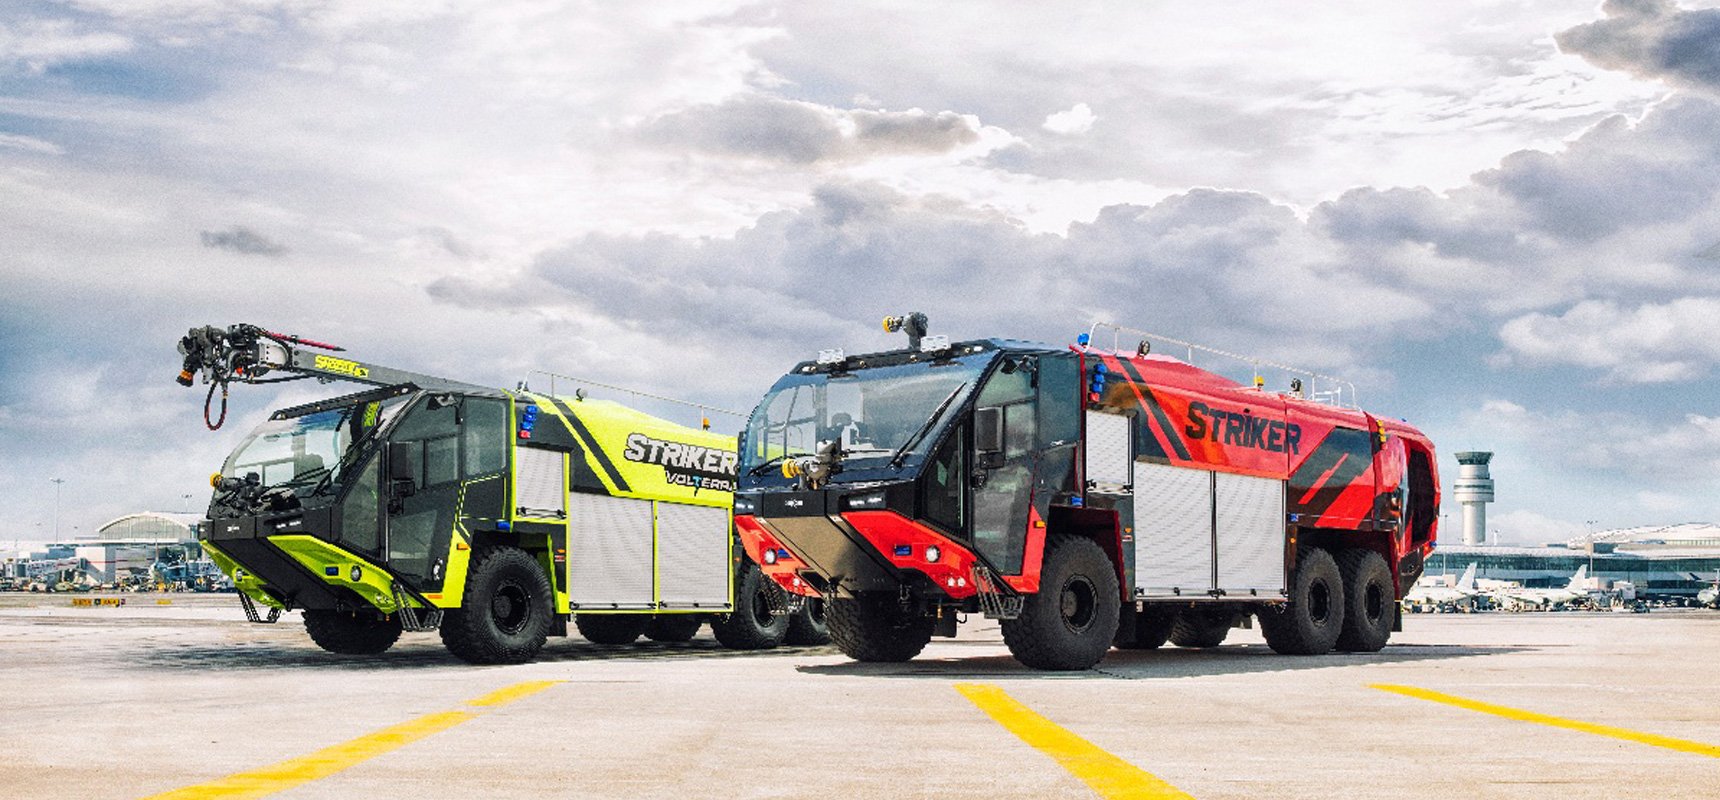 Two ARFF vehicles sitting on a runway - one is neon green and black and one is red and black